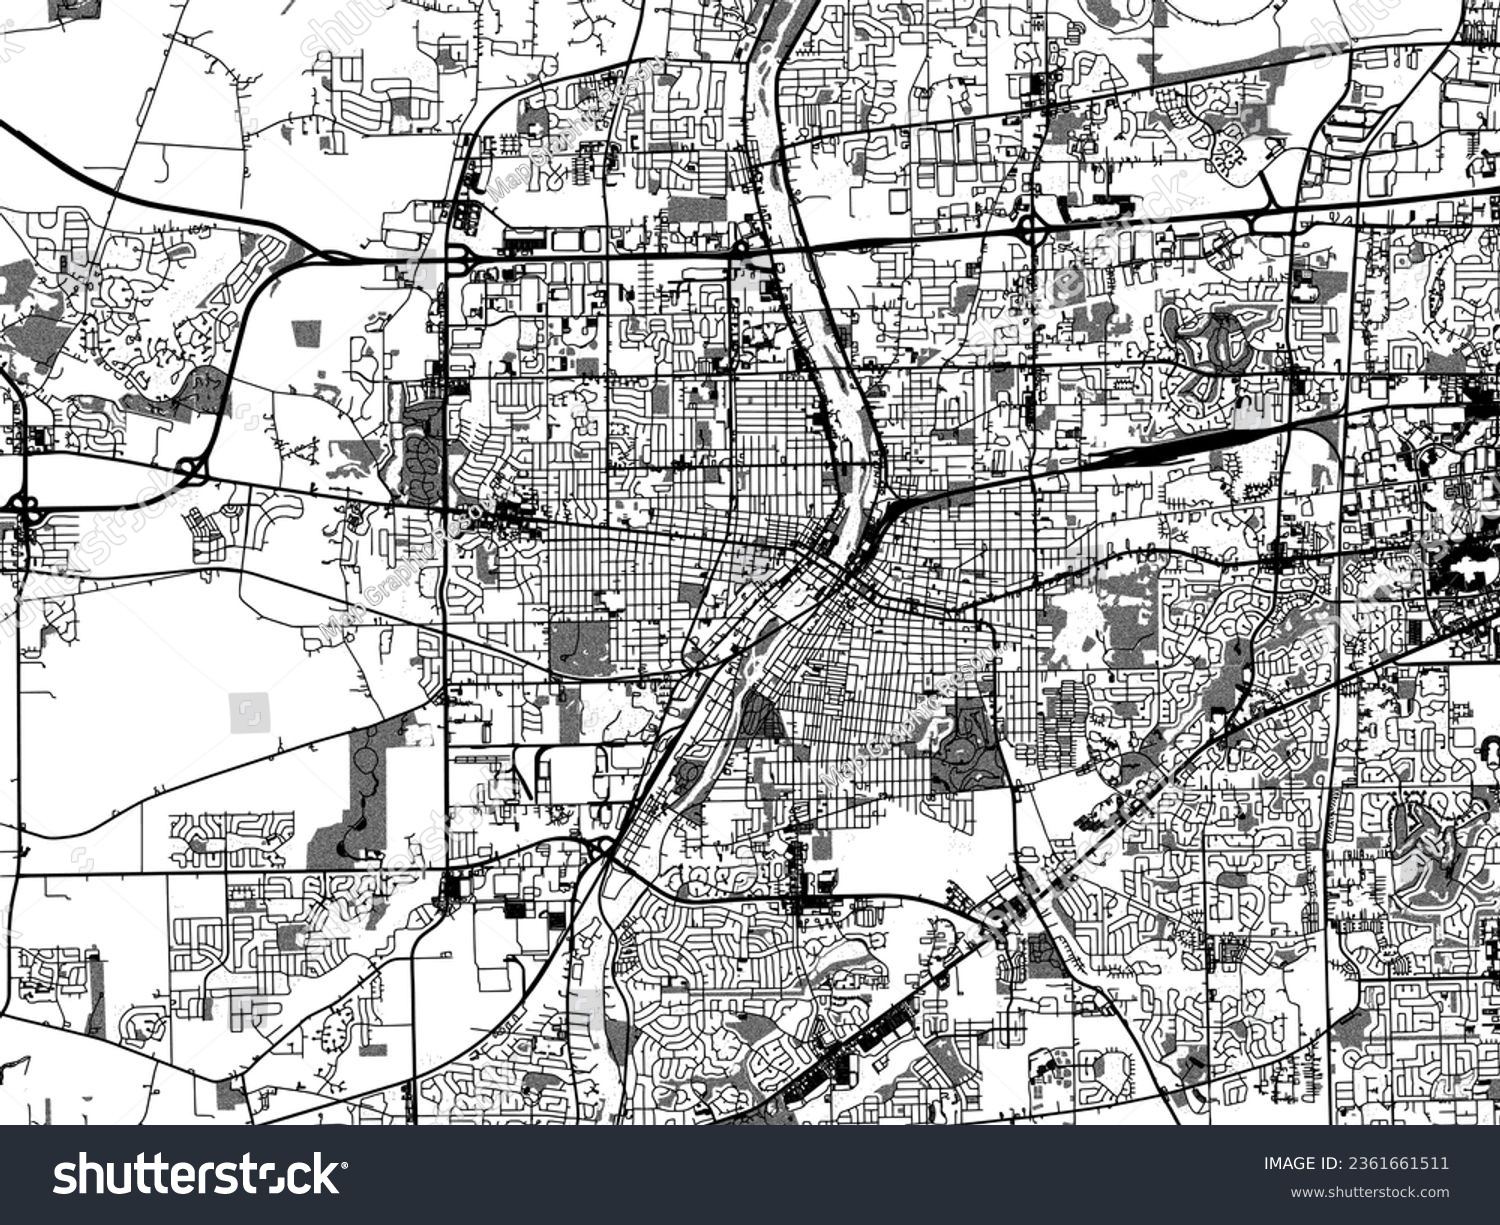 SVG of Greyscale vector city map of Aurora Illinois in the United States of America with with water, fields and parks, and roads on a white background. svg